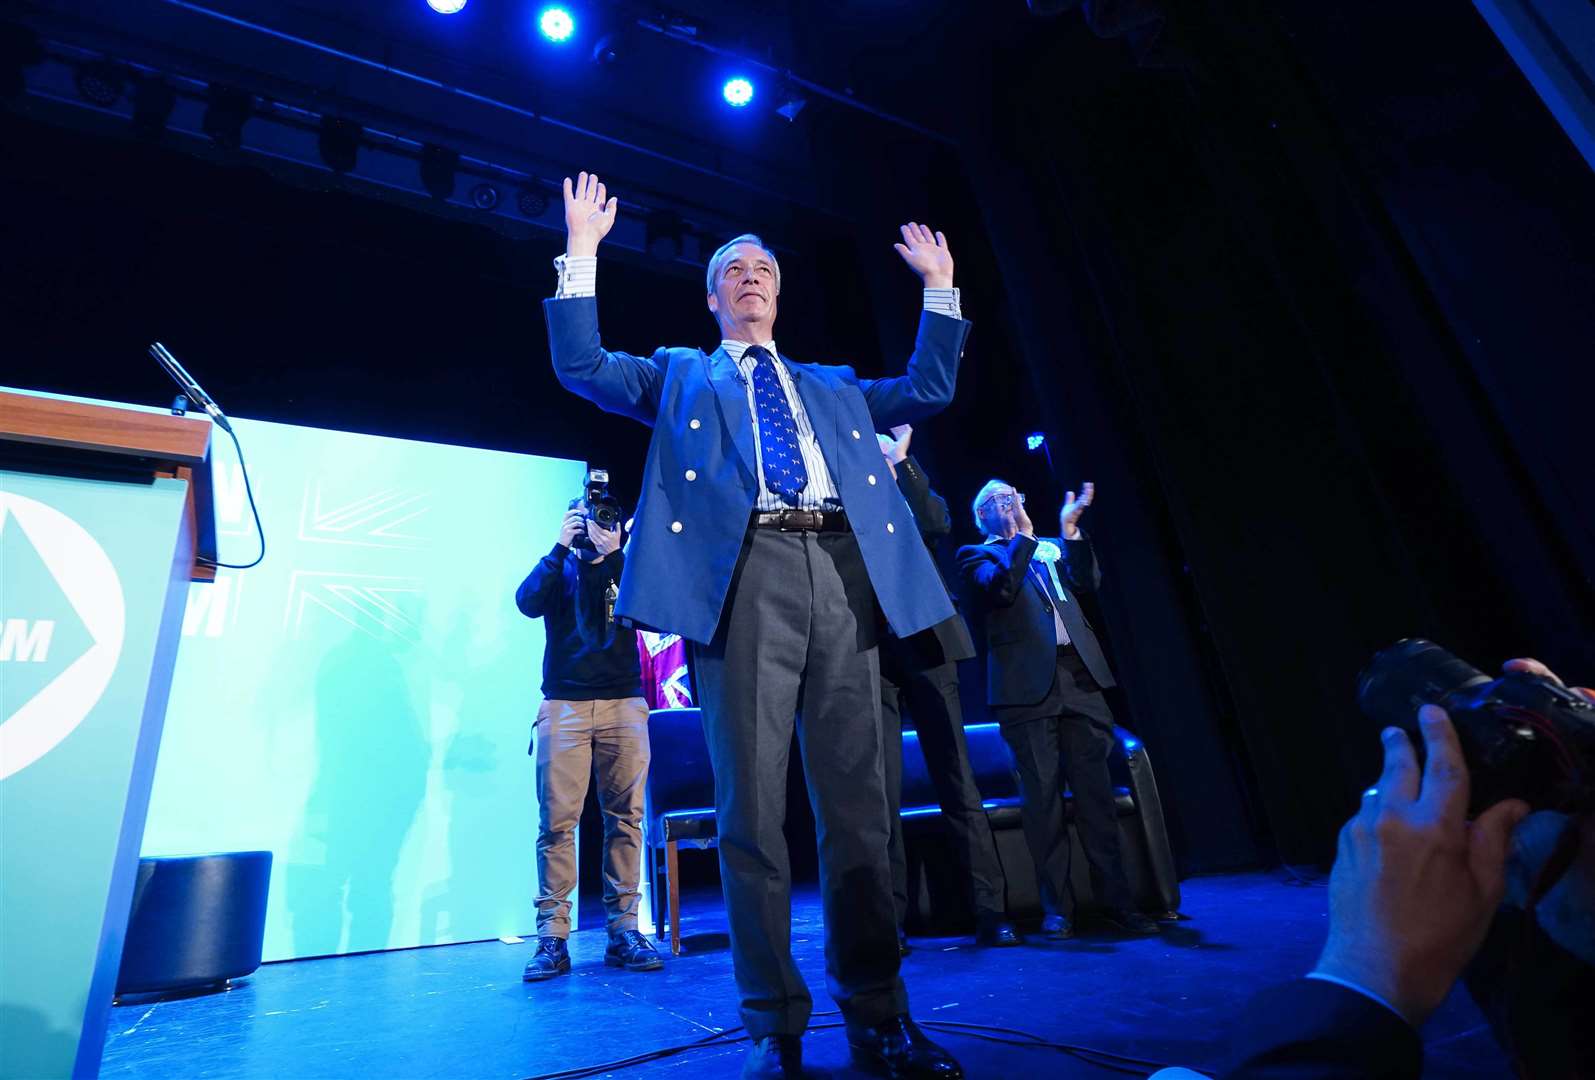 Reform UK leader Nigel Farage after speaking at Princes Theatre in Clacton (Ian West/PA)